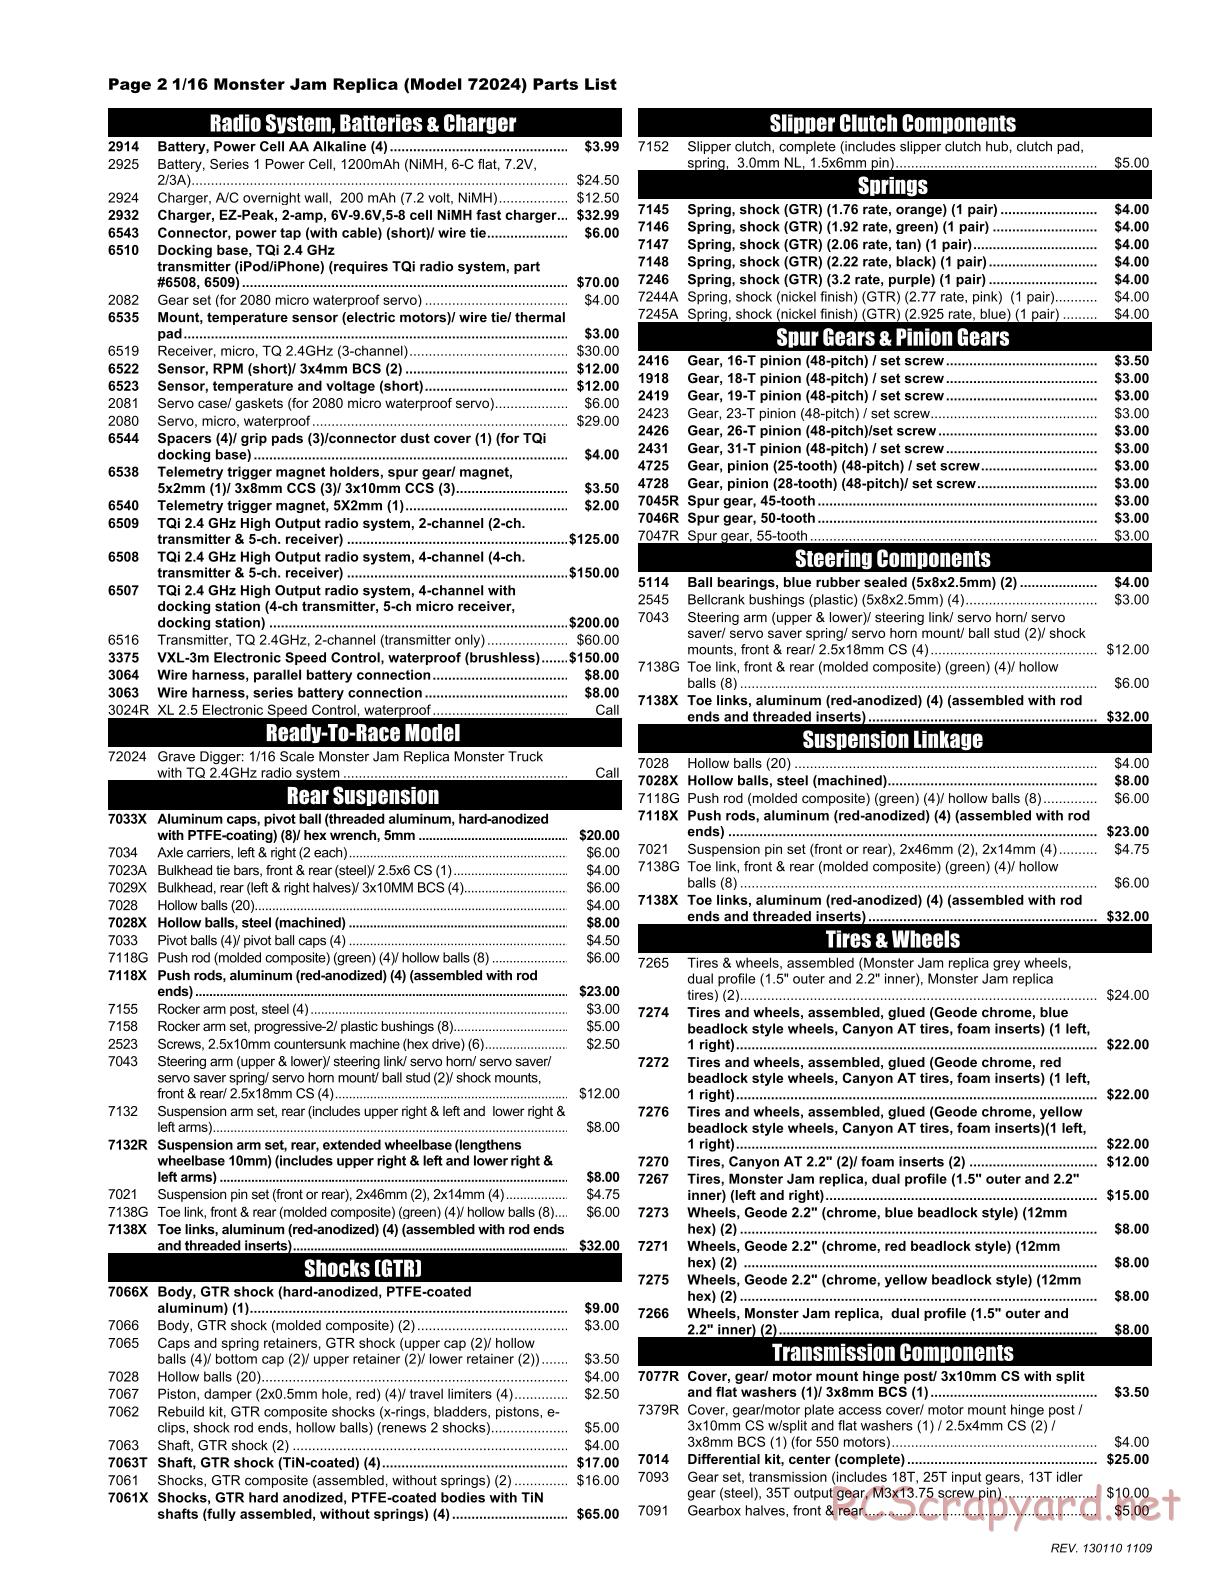 Traxxas - 1/16 Grave Digger (2013) - Parts List - Page 2